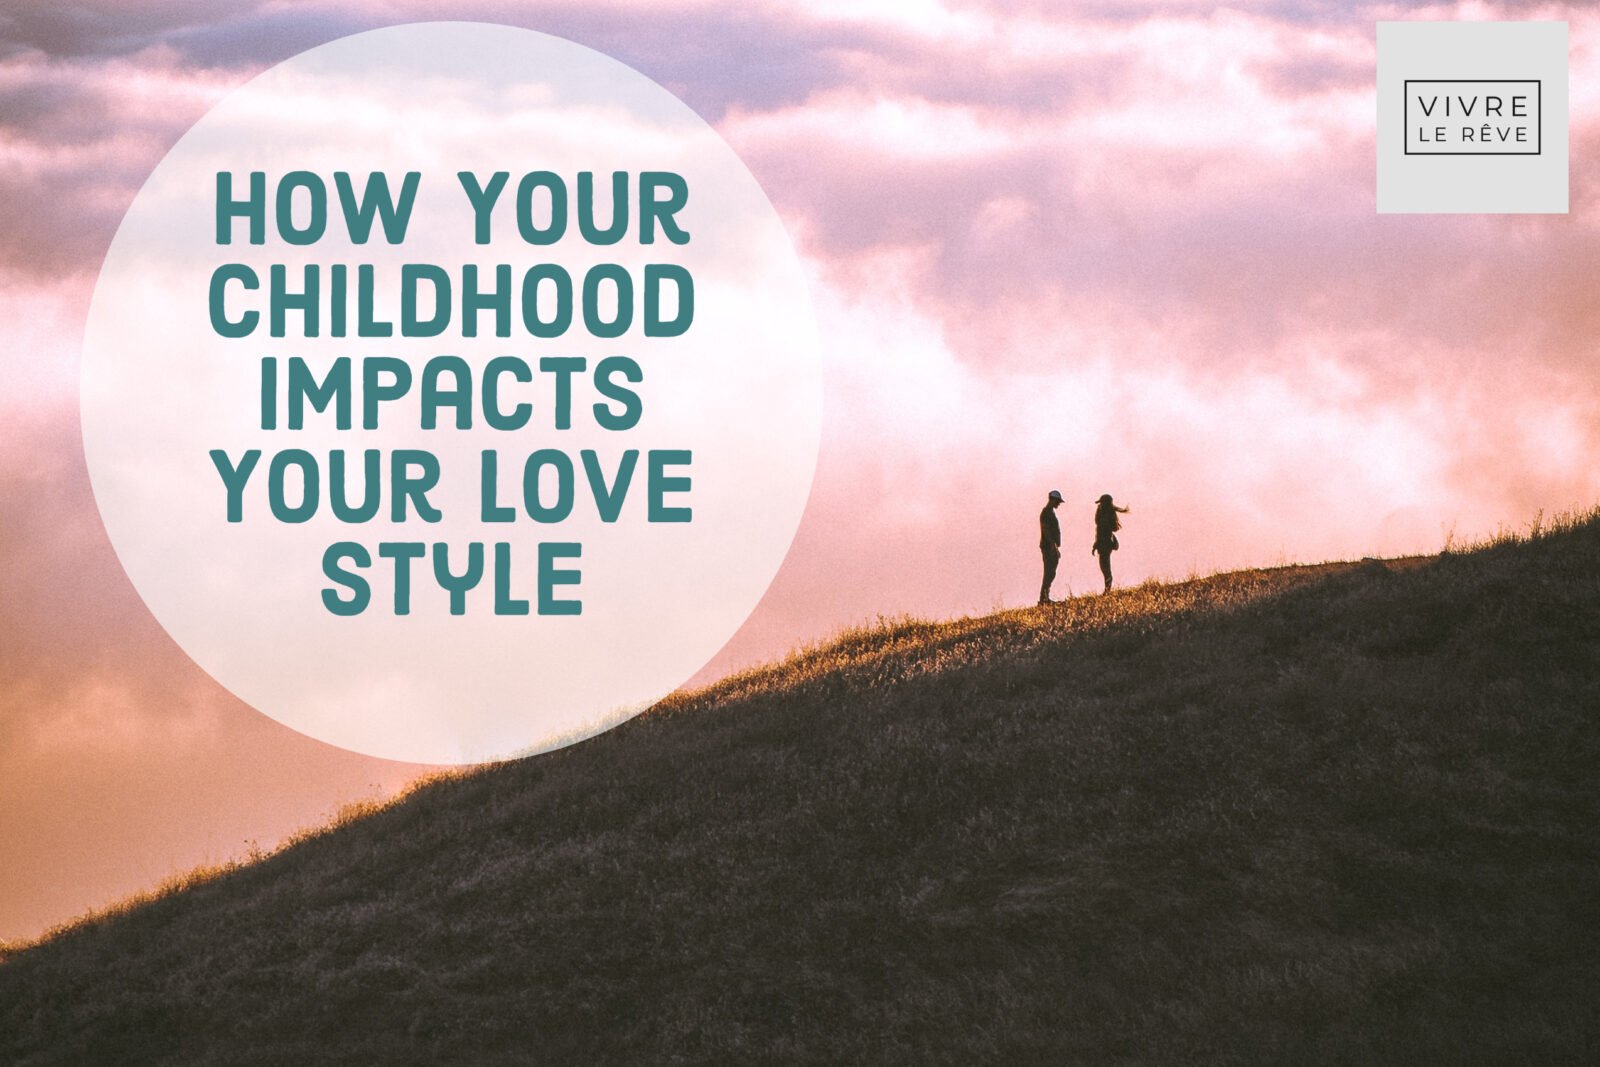 How Your Childhood Impacts Your Love Style